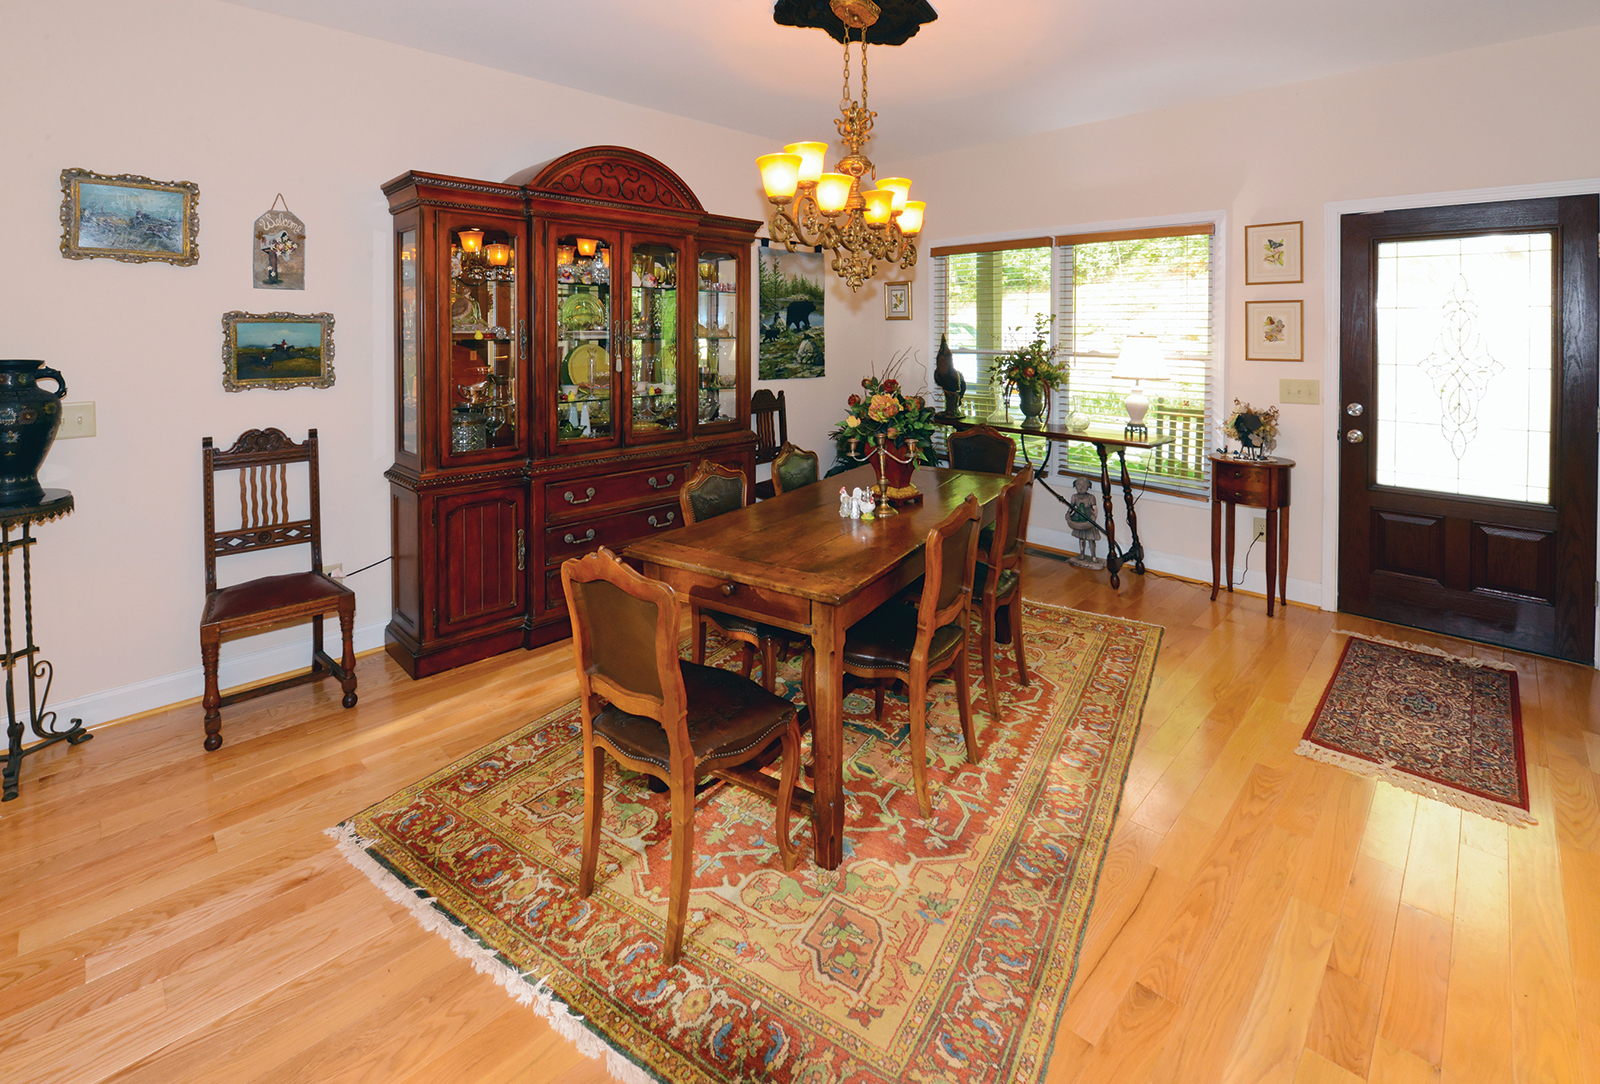 Home for sale, dining room, Highlands NC